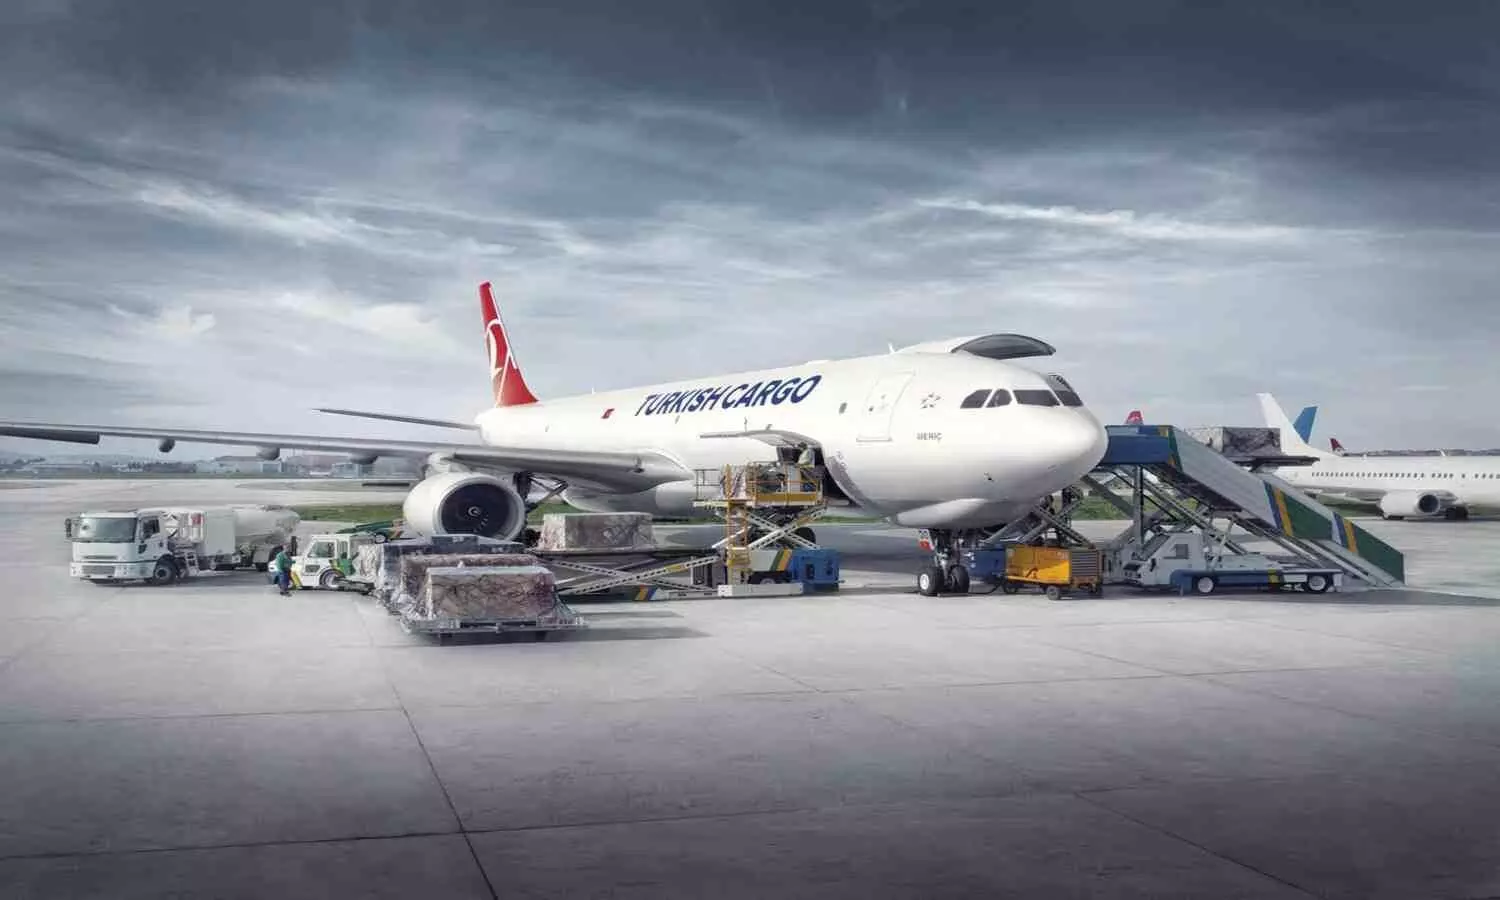 WFS expects to handle approximately 31,000 tonnes of cargo per year for Turkish Airlines at the two airports